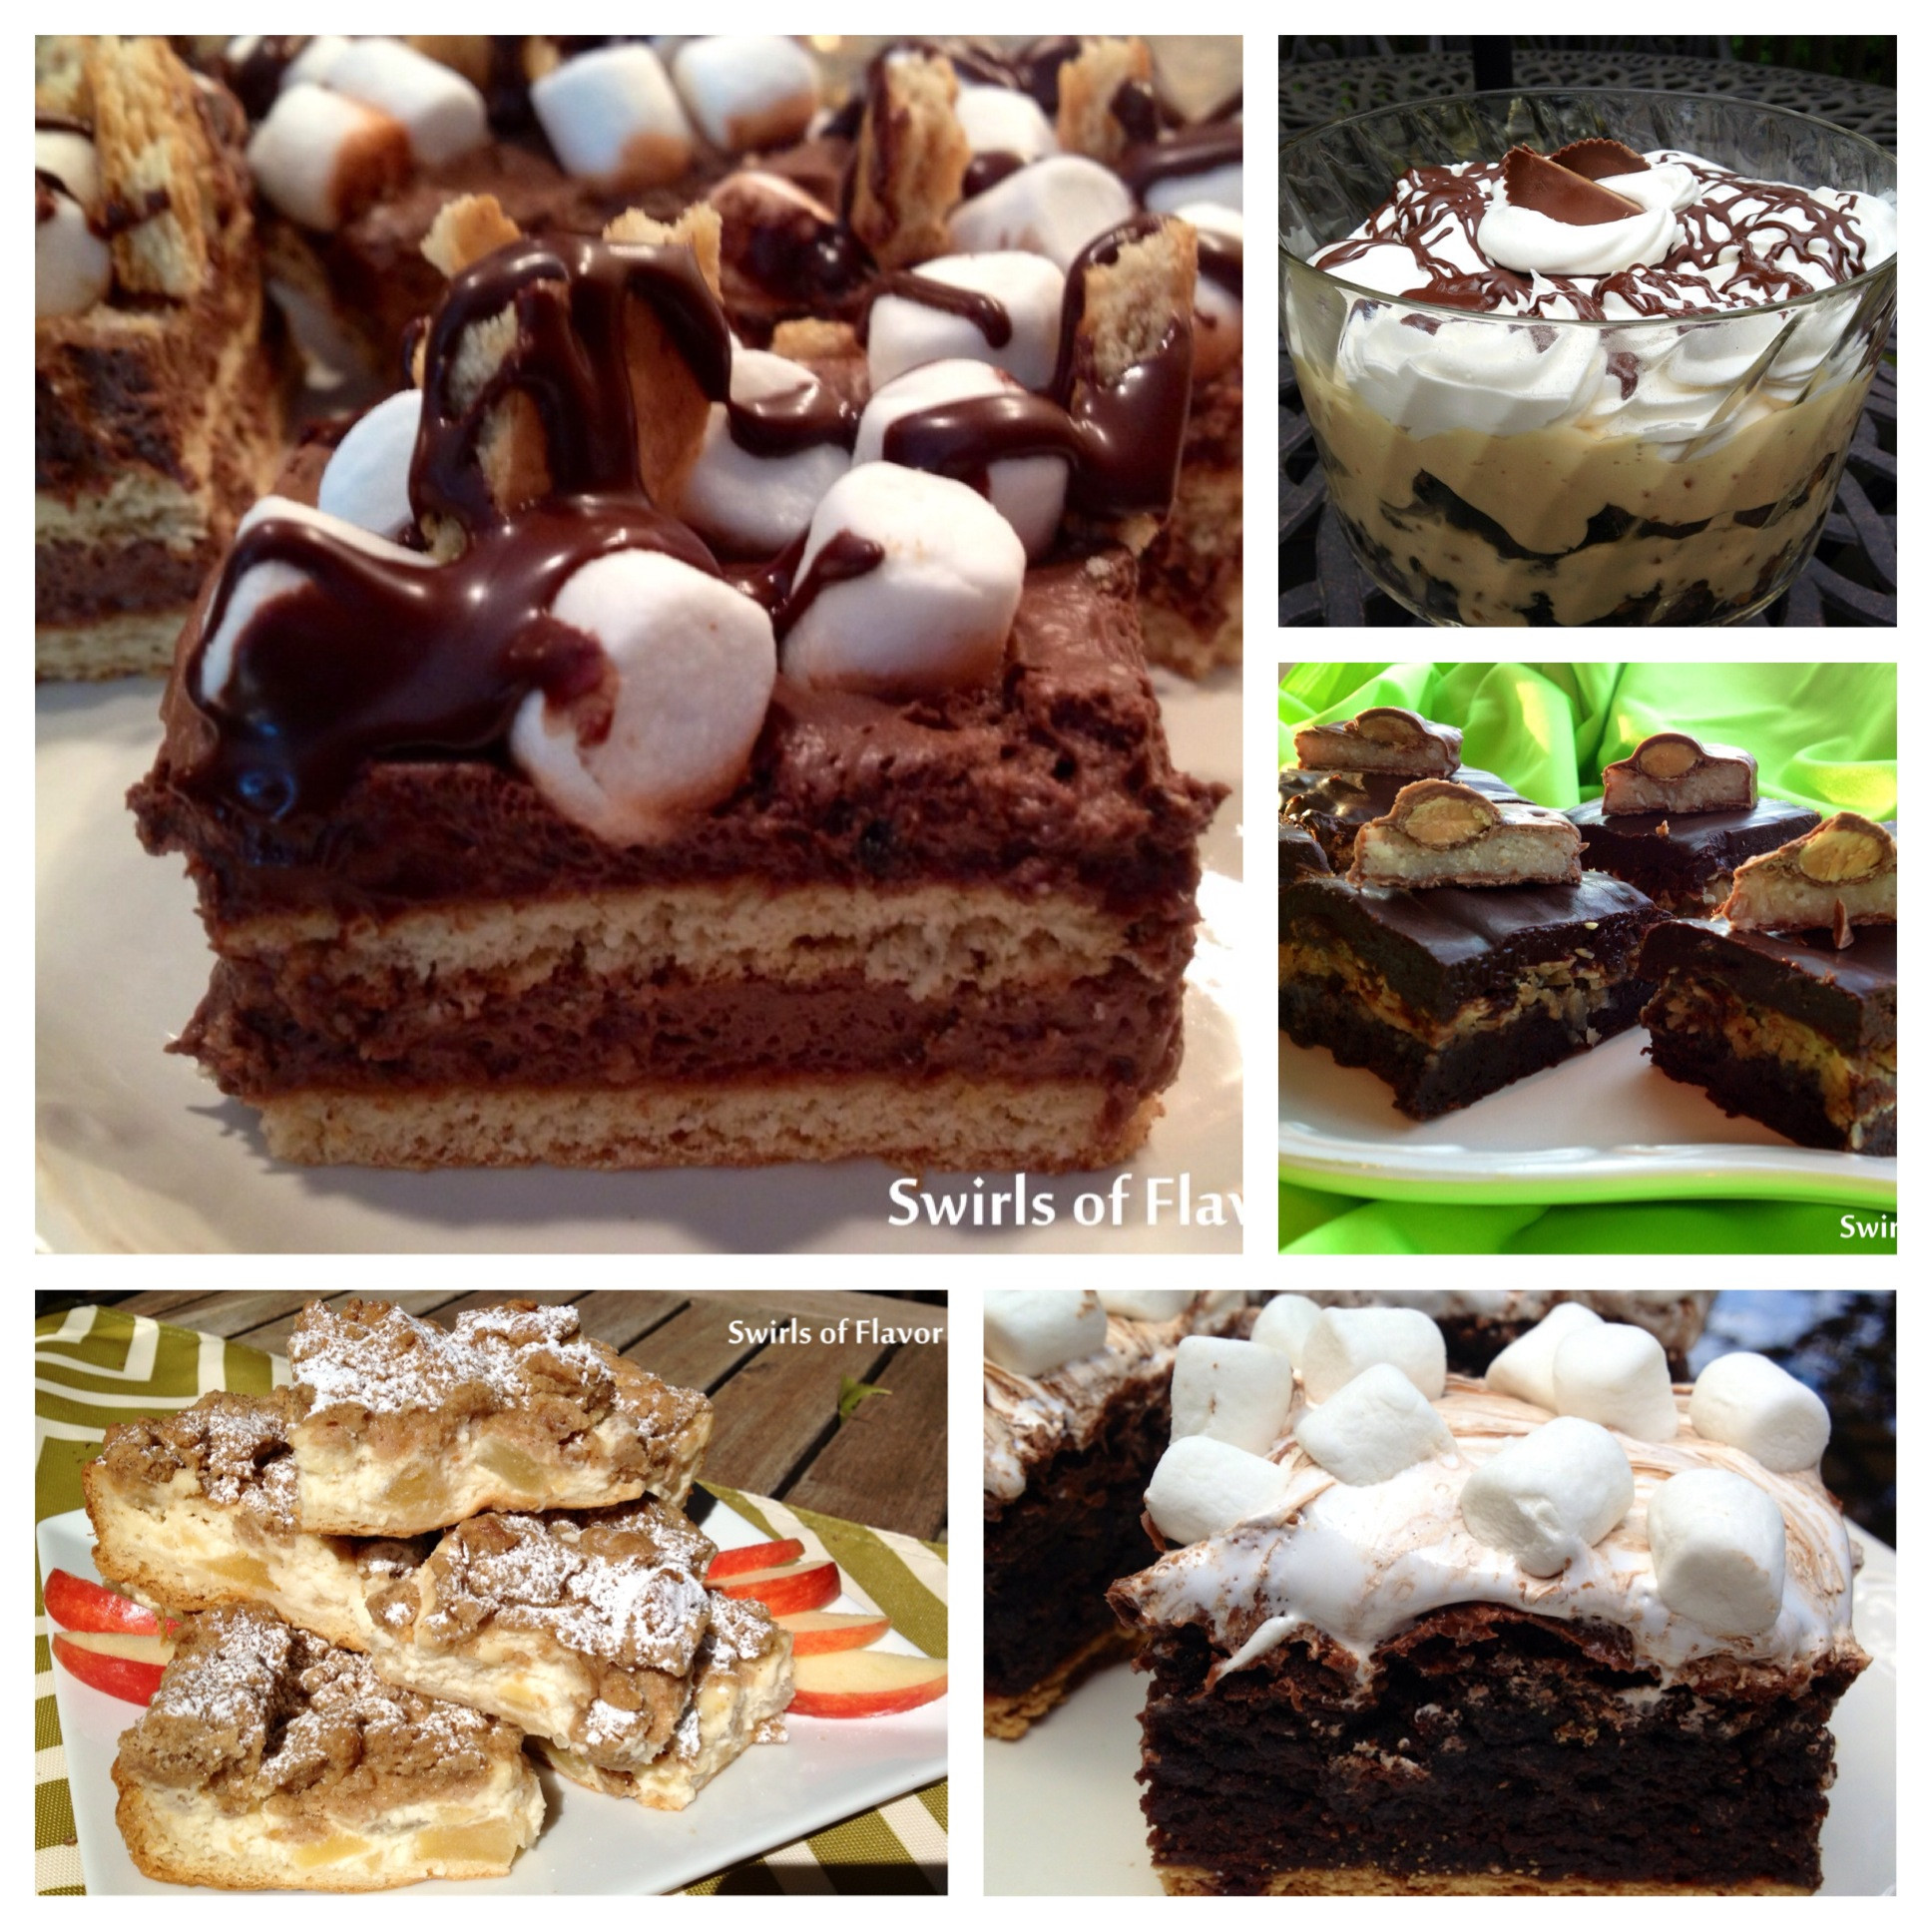 Super Bowl Sweets Recipes
 Best Ever Super Bowl Recipe Roundup Swirls of Flavor